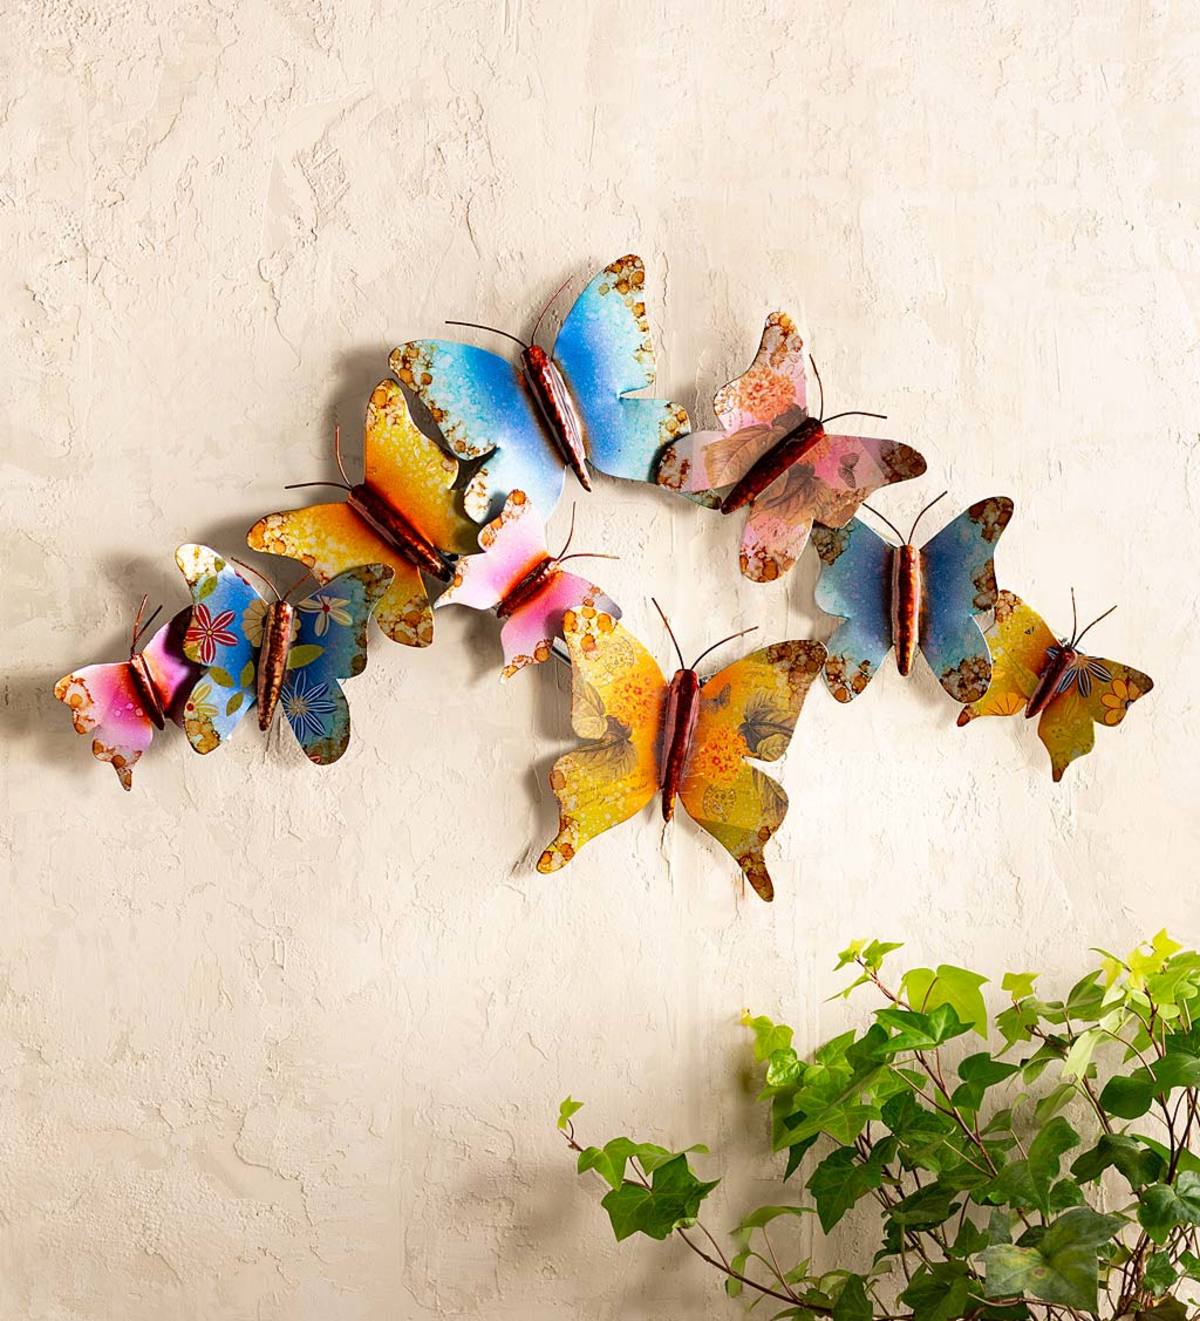 LARGE METAL COLOURFUL BUTTERFLY GARDEN DECORATION WALL ART 31cm x 35cm 270822 